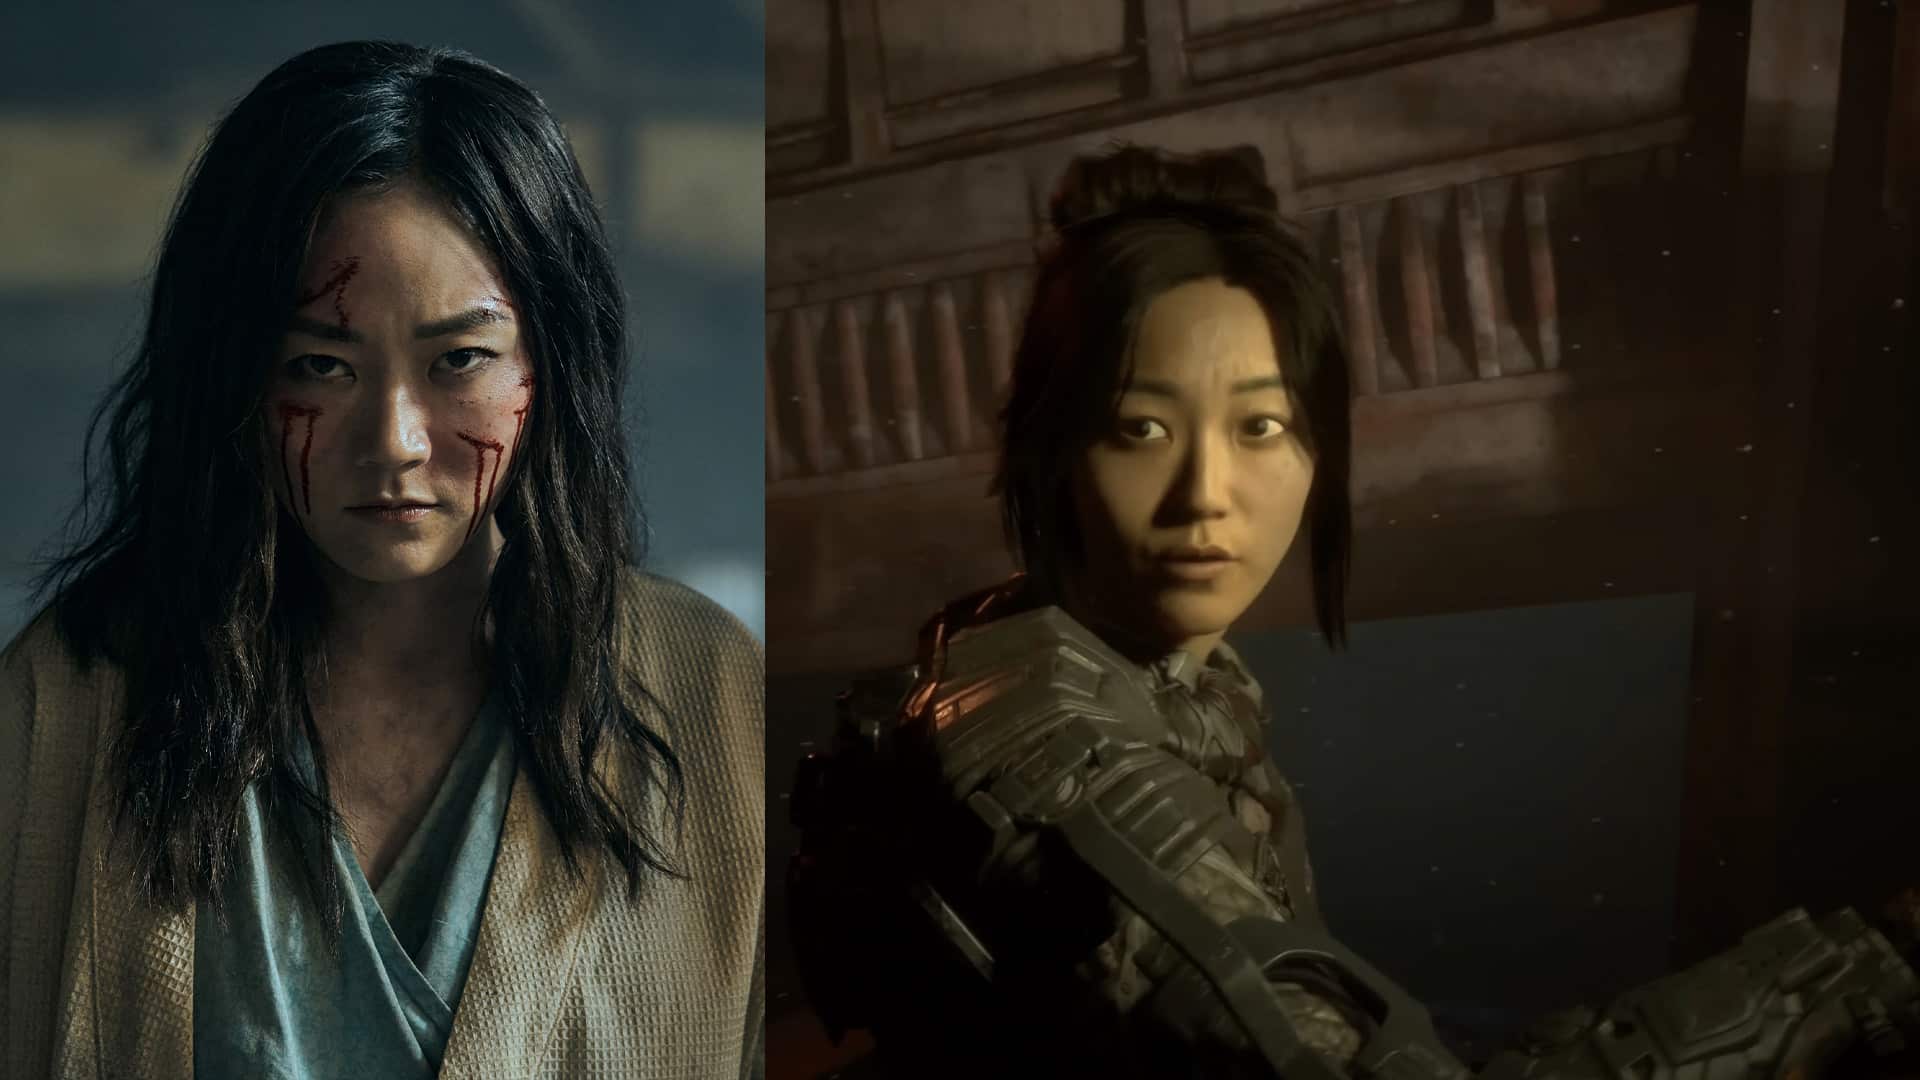 Karen Fukuhara actress who plays Kimiko in The Boys is part of the history of The Callisto Protocol, GamersRD